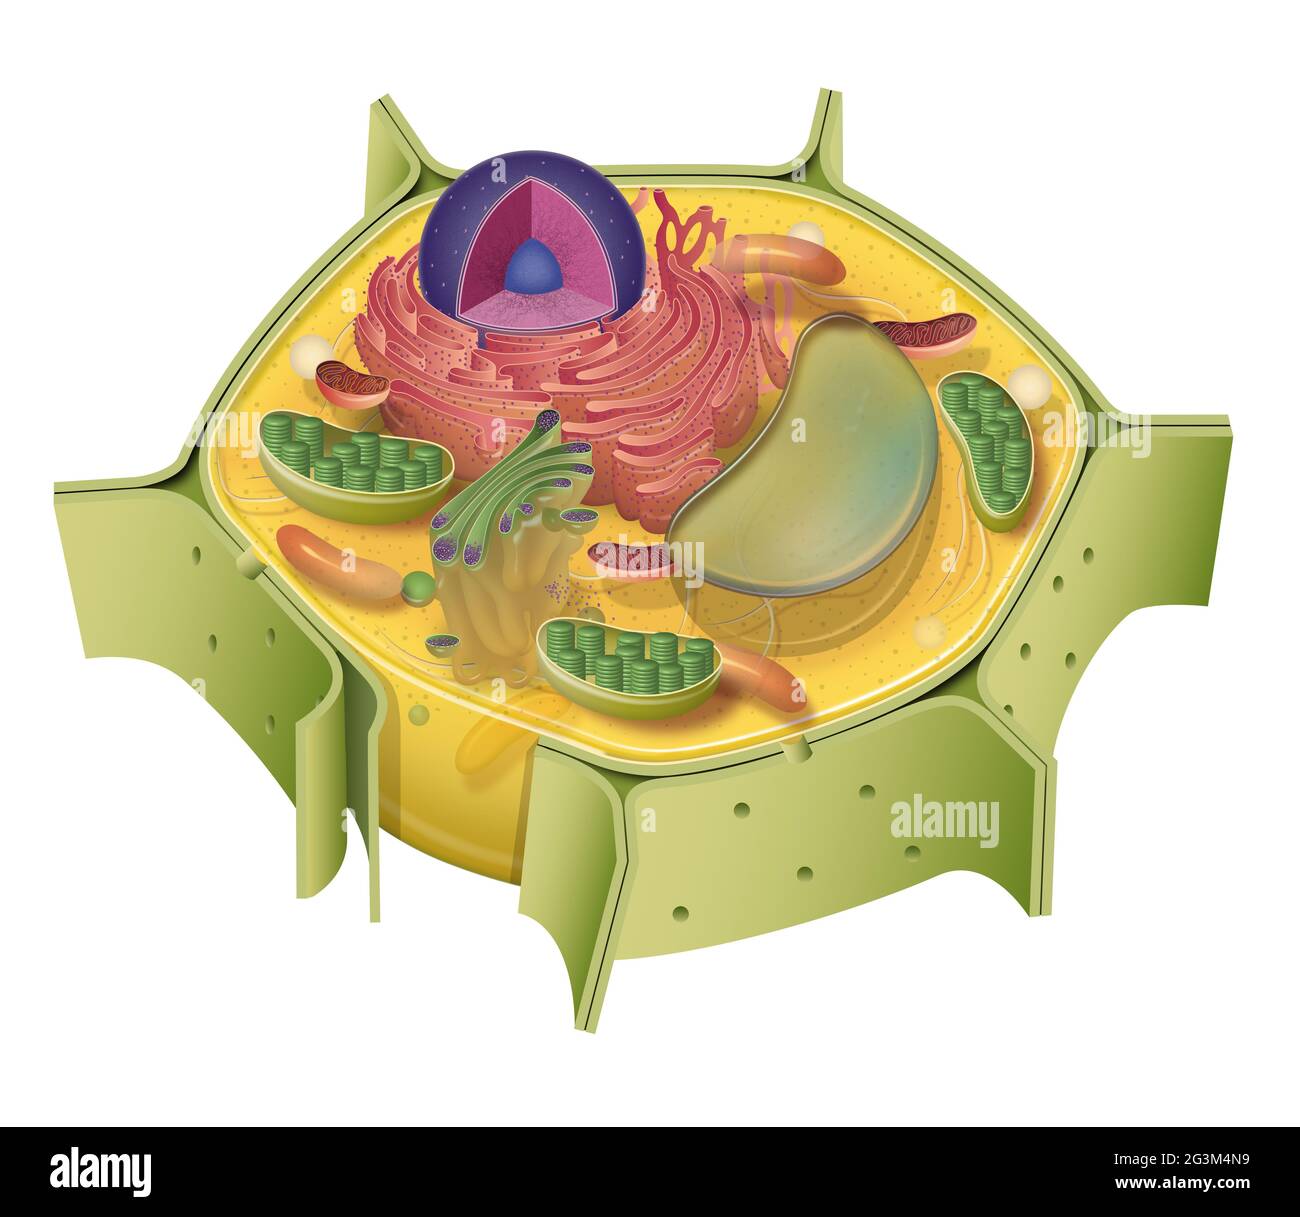 lllustration of the plant cell Stock Photo